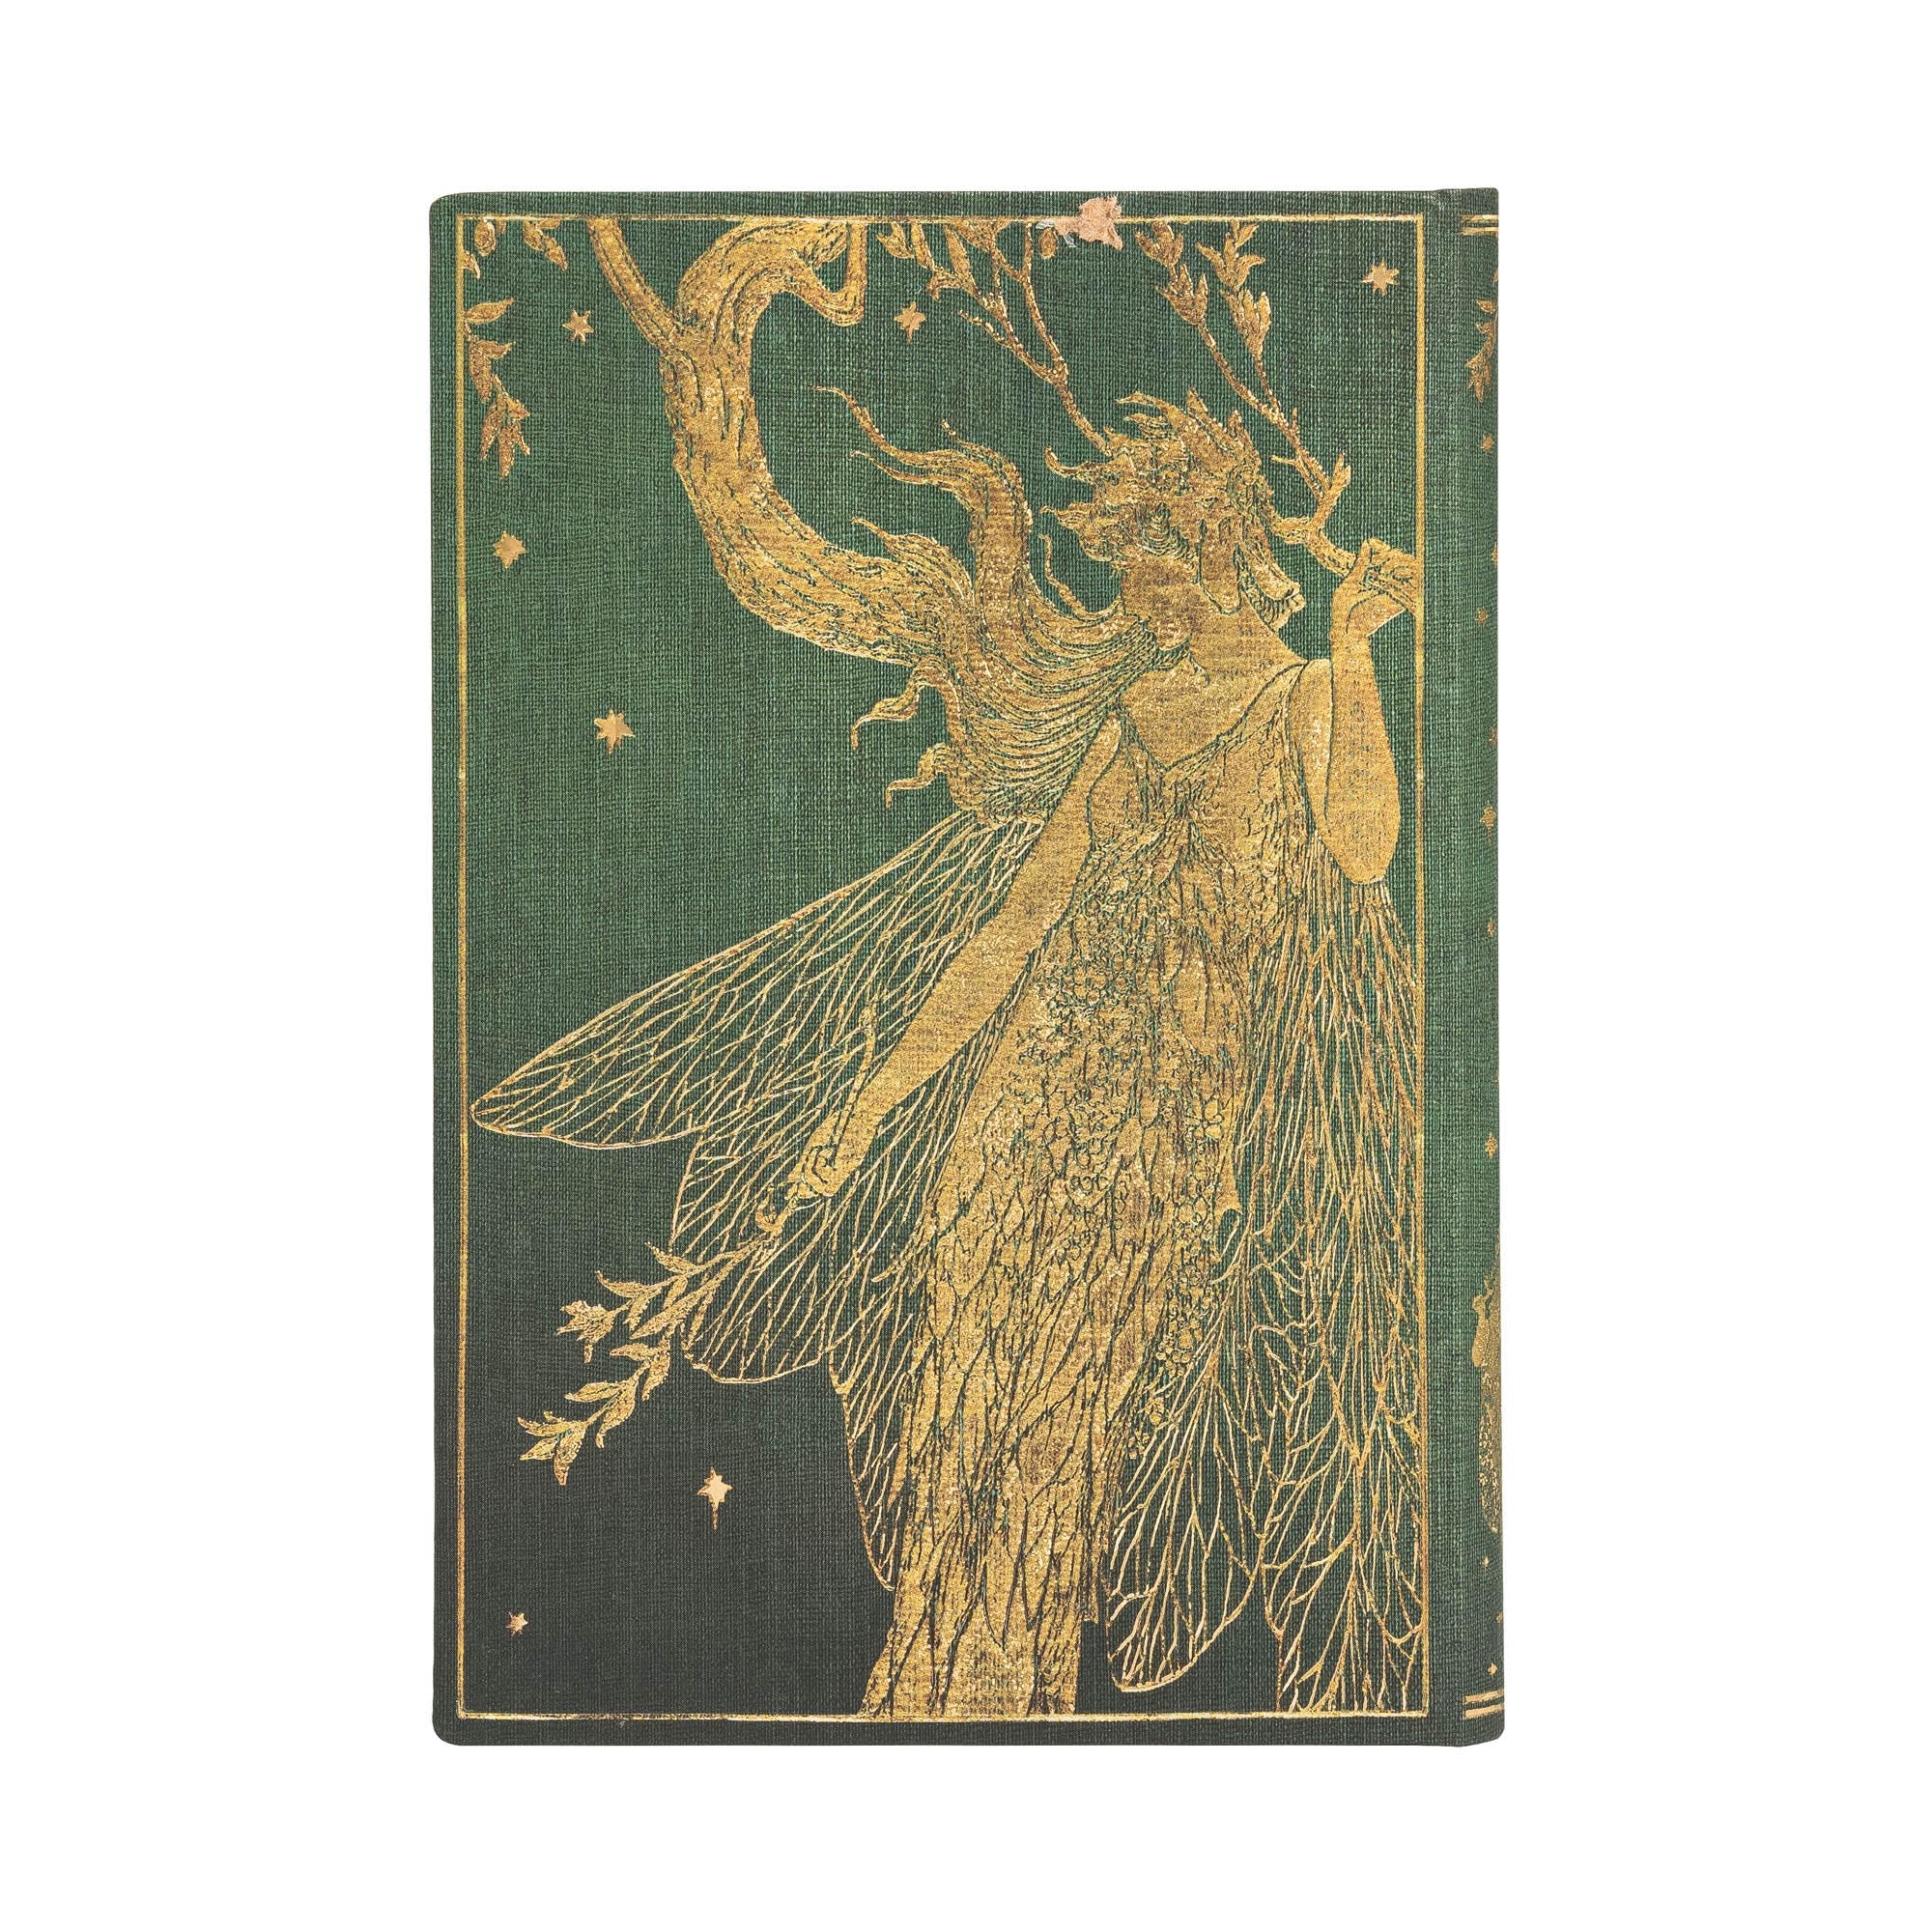 Paperblanks Olive Fairy Lined Mini Hardcover Journal    